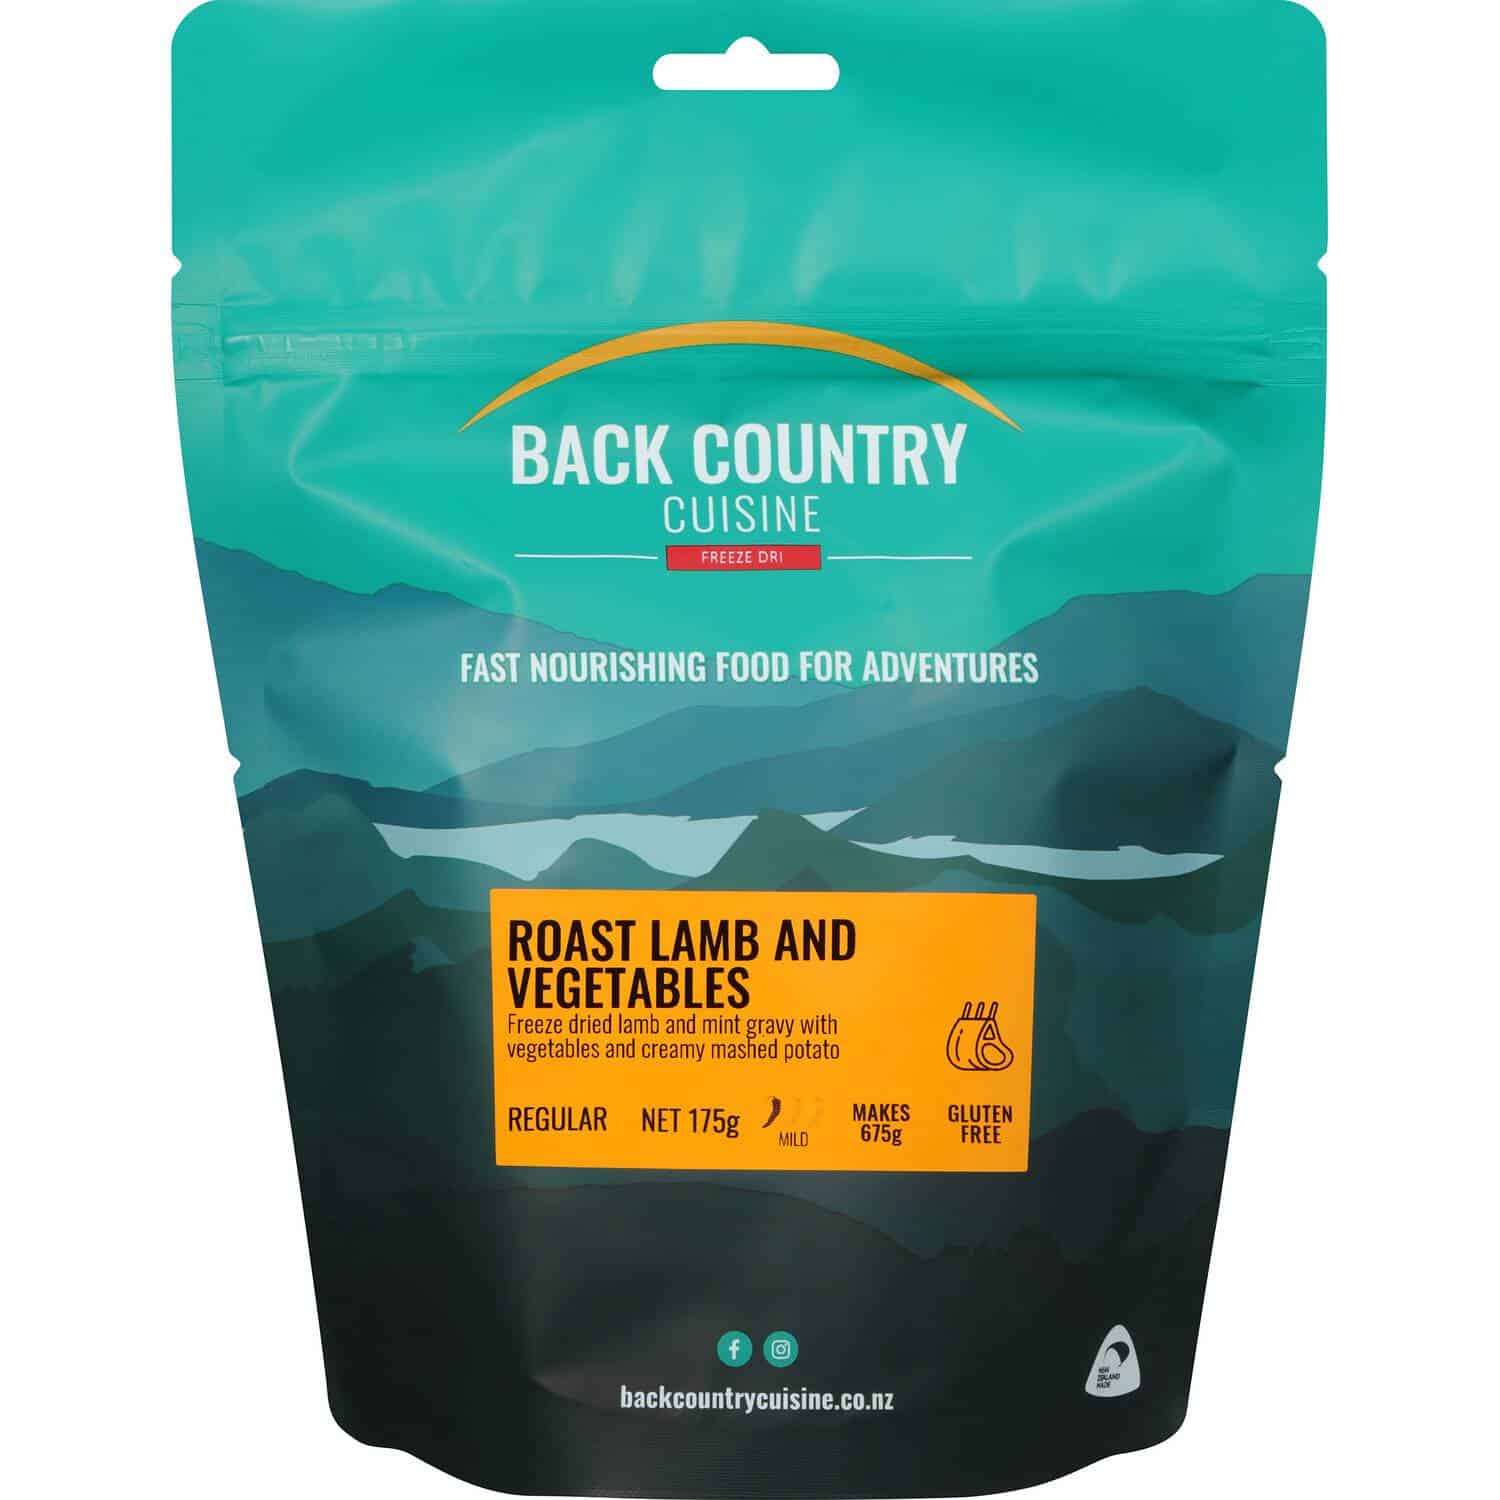 Back Country Cuisine Roast Lamb & Vegetables Regular - Tramping Food and Accessories sold by Venture Outdoors NZ